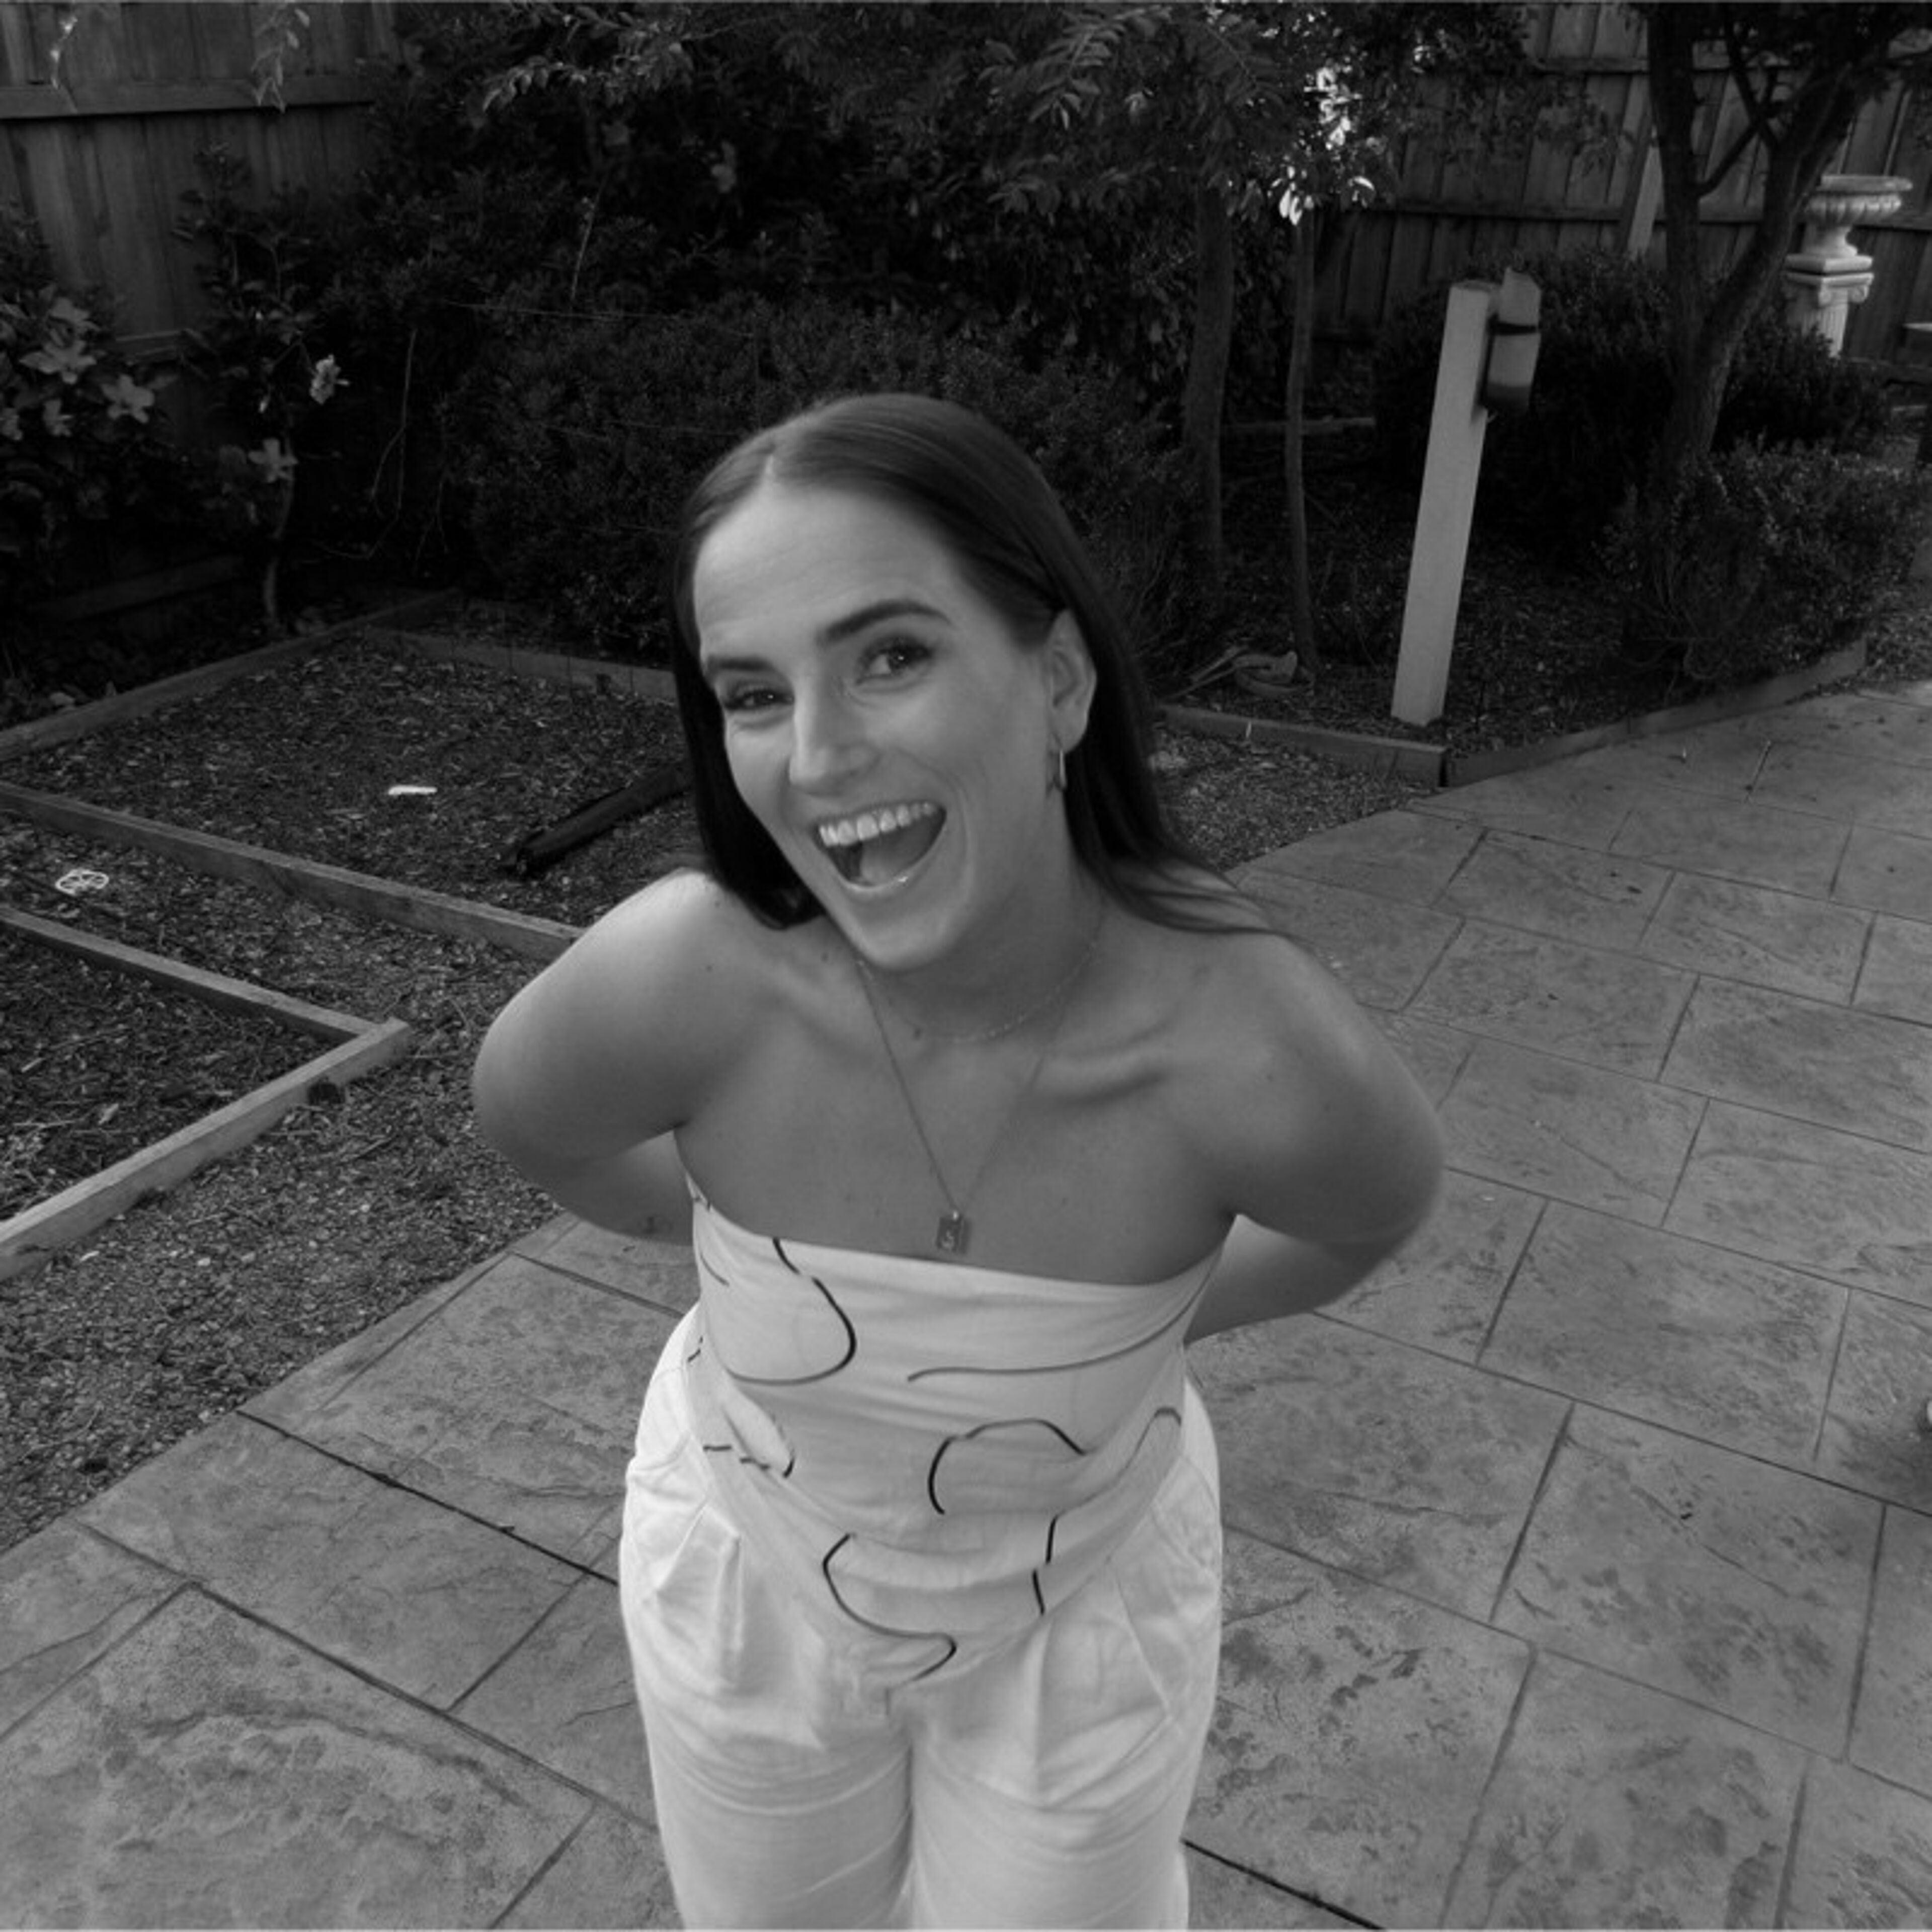 Monochrome image of a joyful woman in a strapless dress smiling broadly, standing in a residential garden.